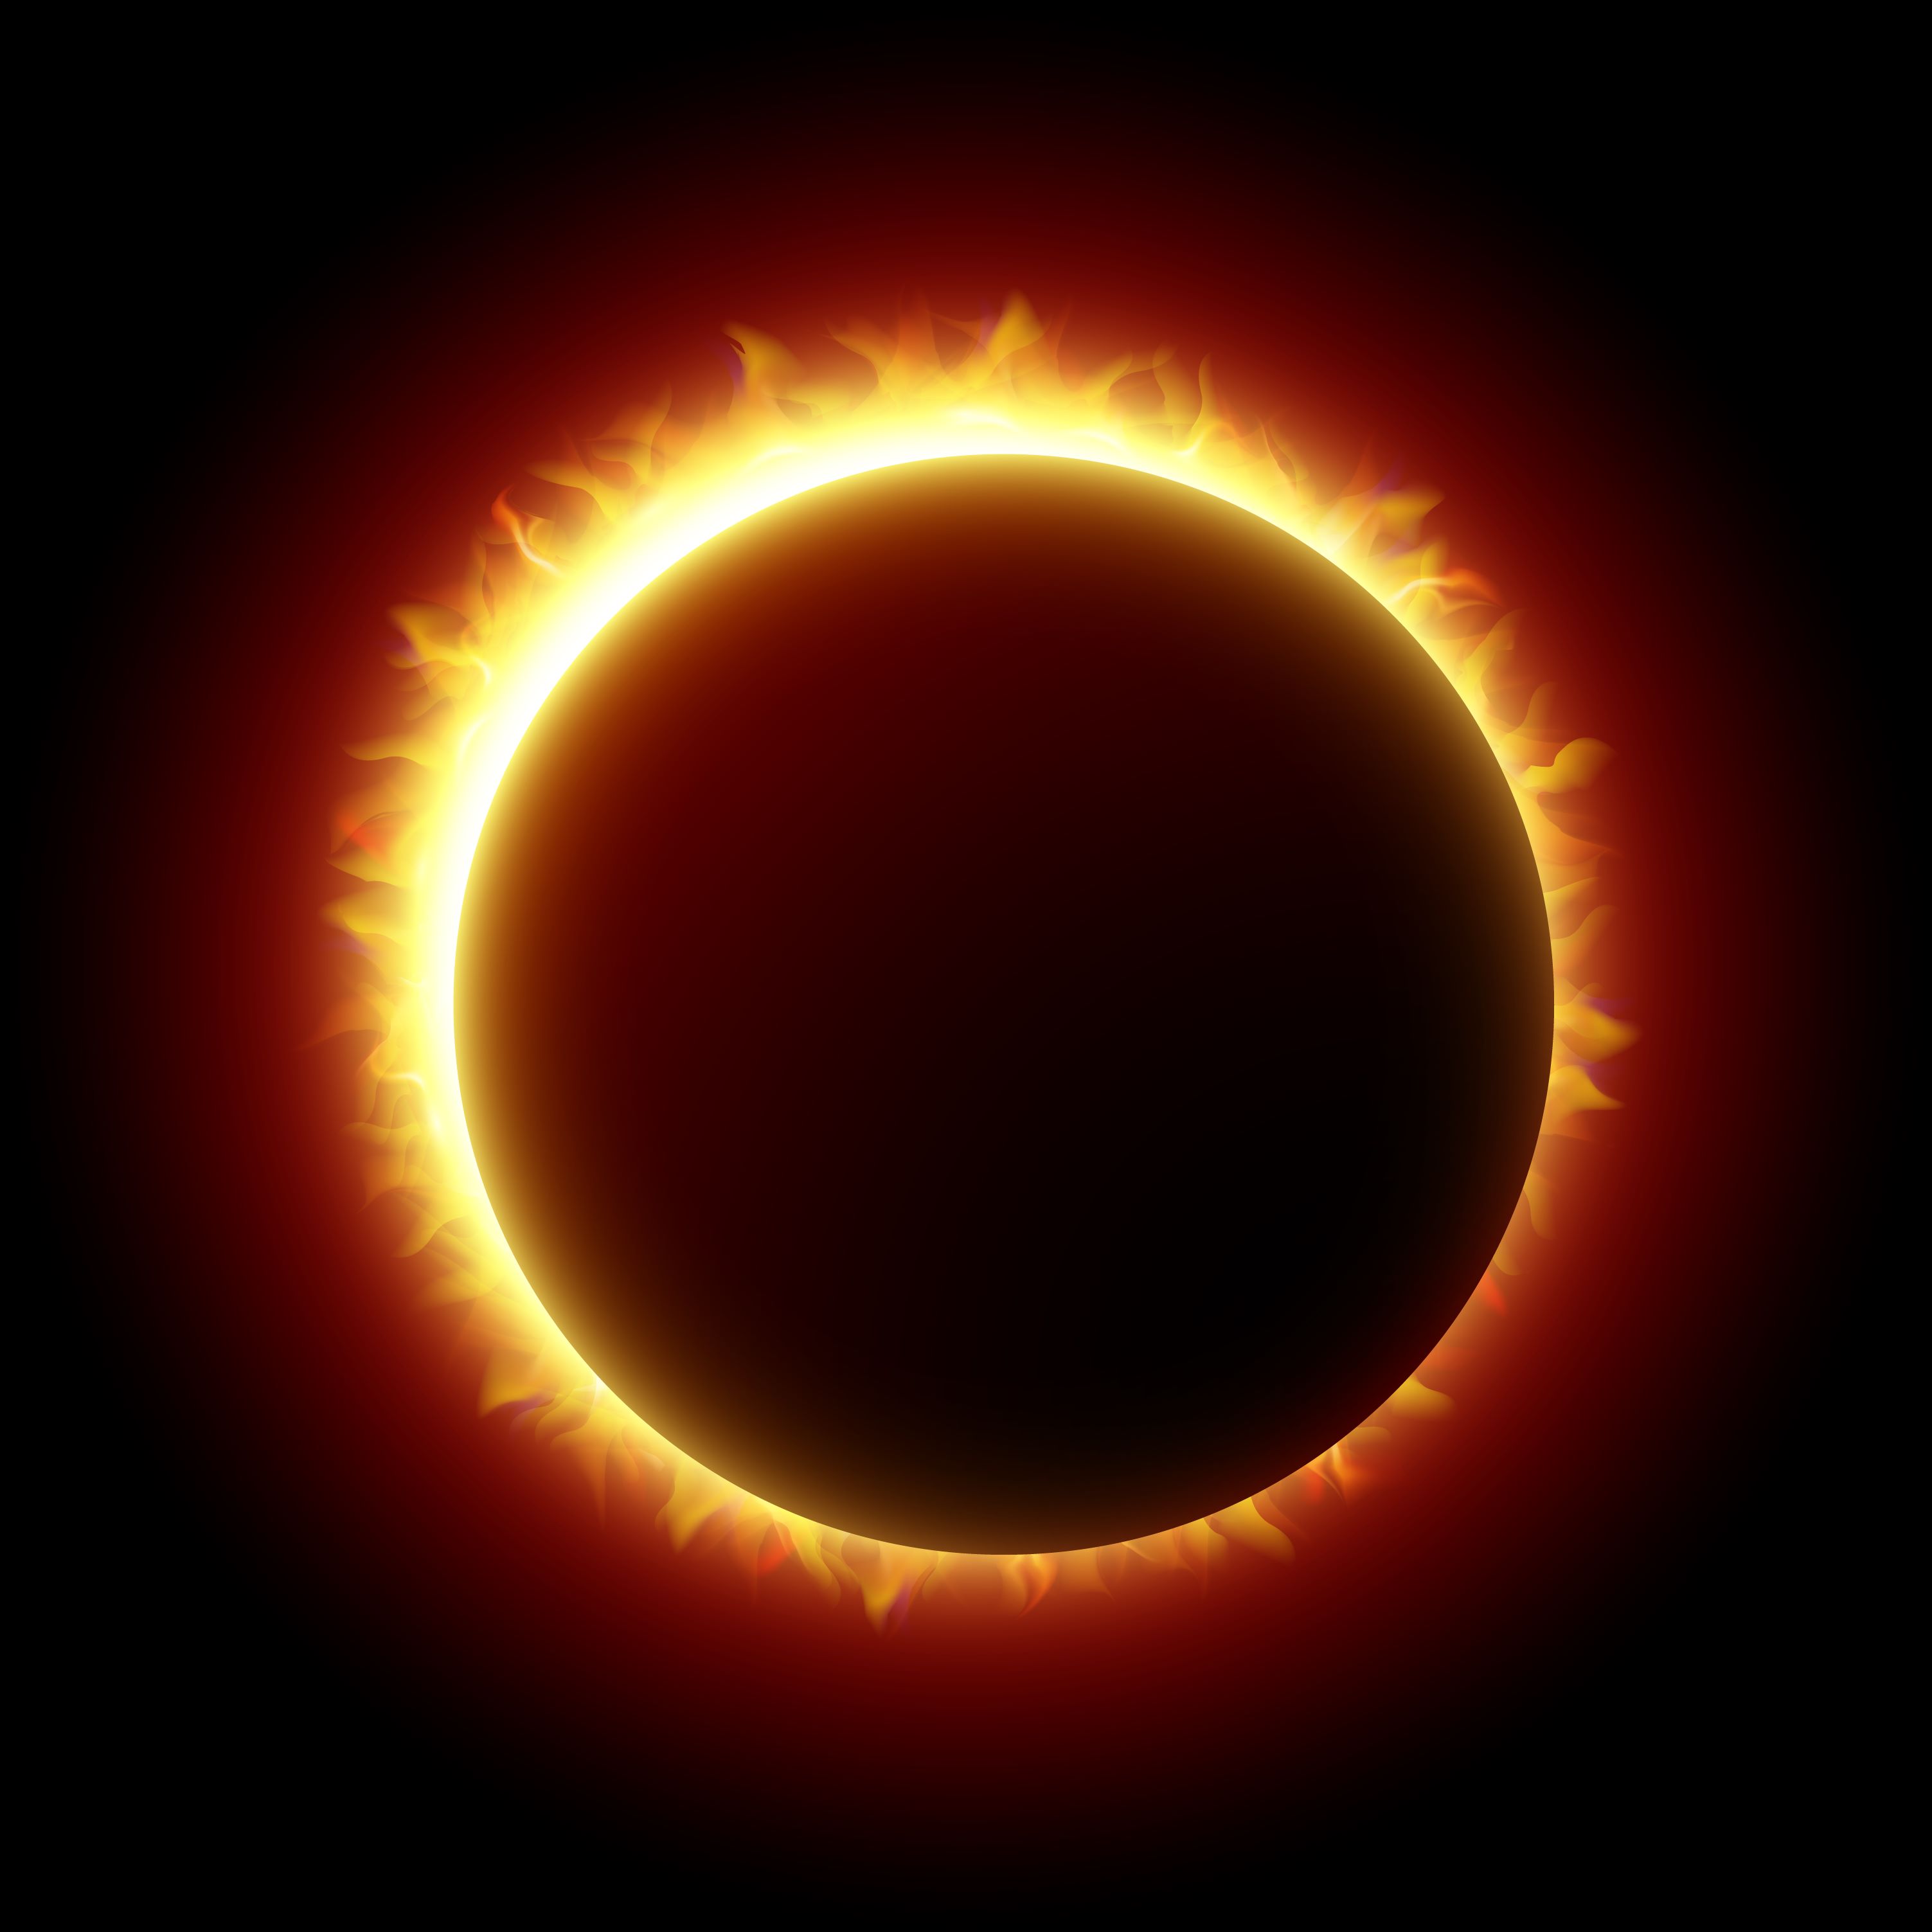 Image of solar eclipse used in ad. 